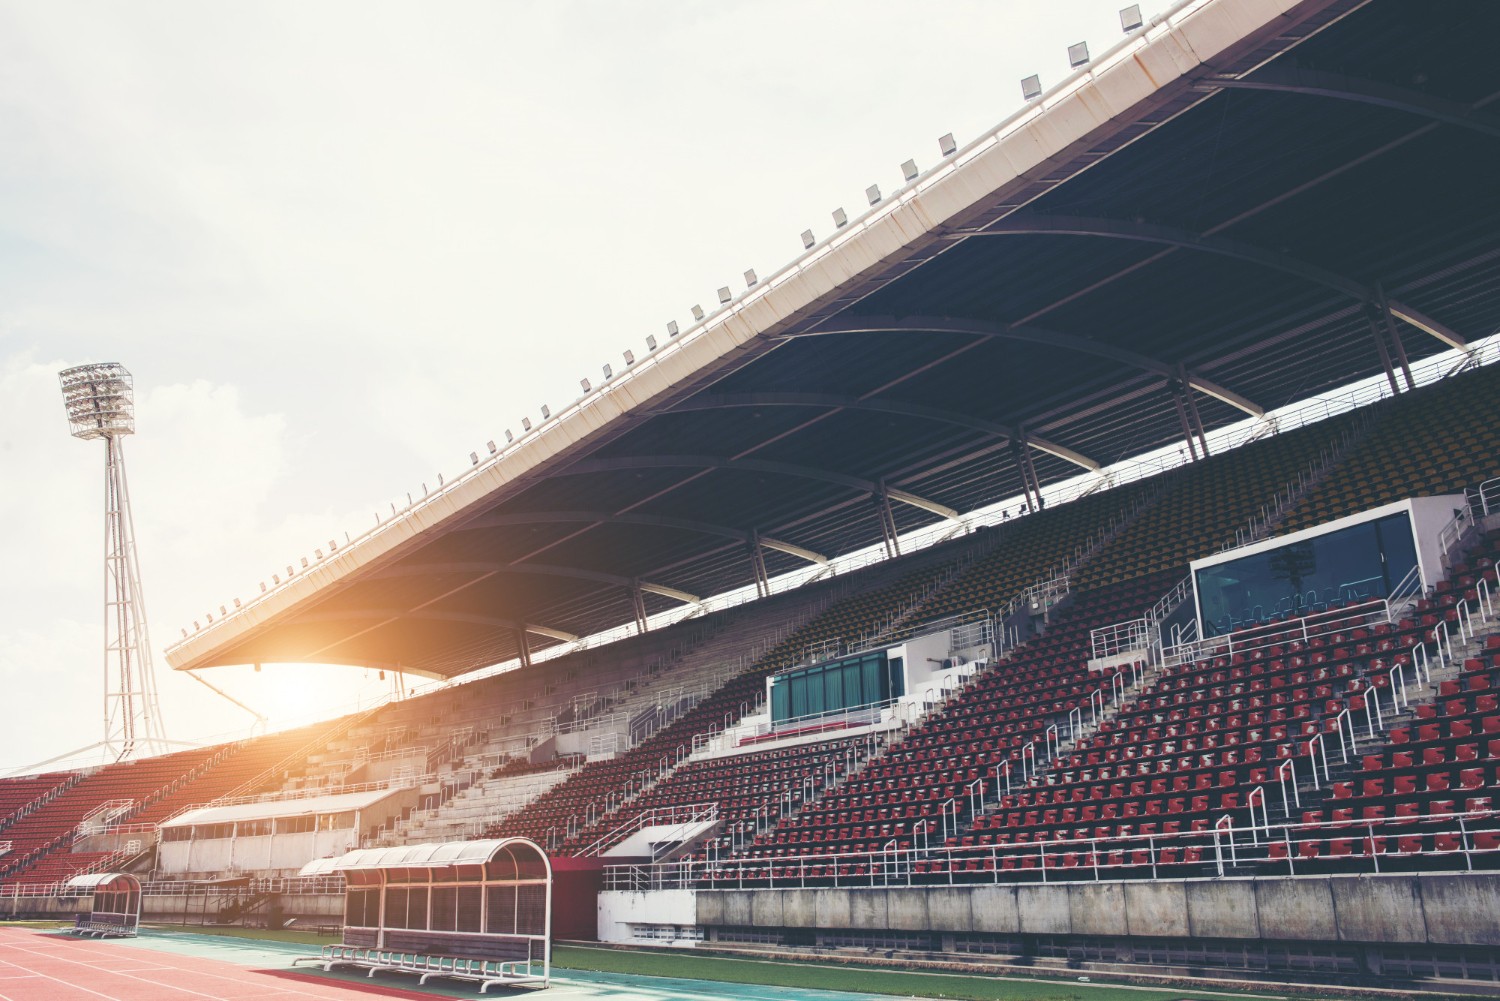 Advantages of Adding Shade to an Athletic Stadium